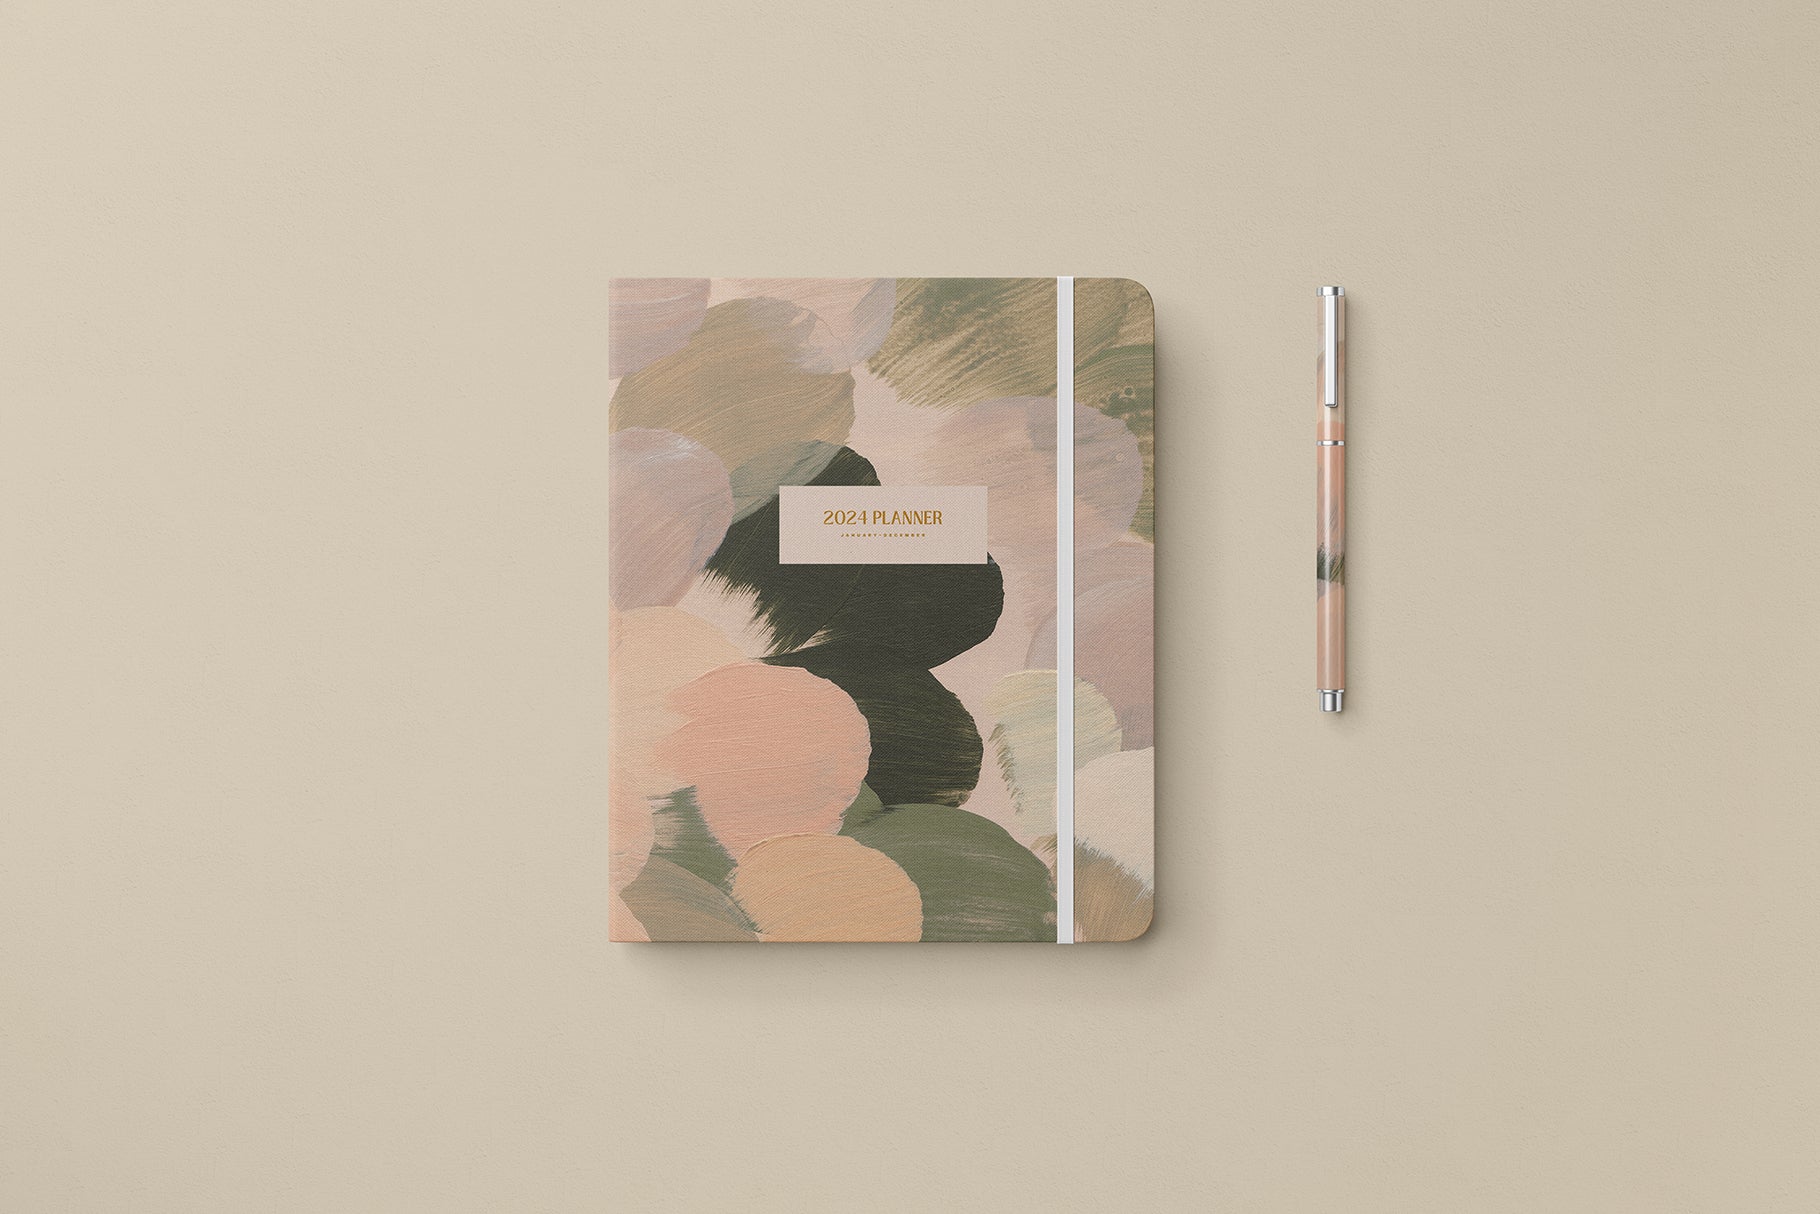 abstract painted artistic background featuring planner cover design